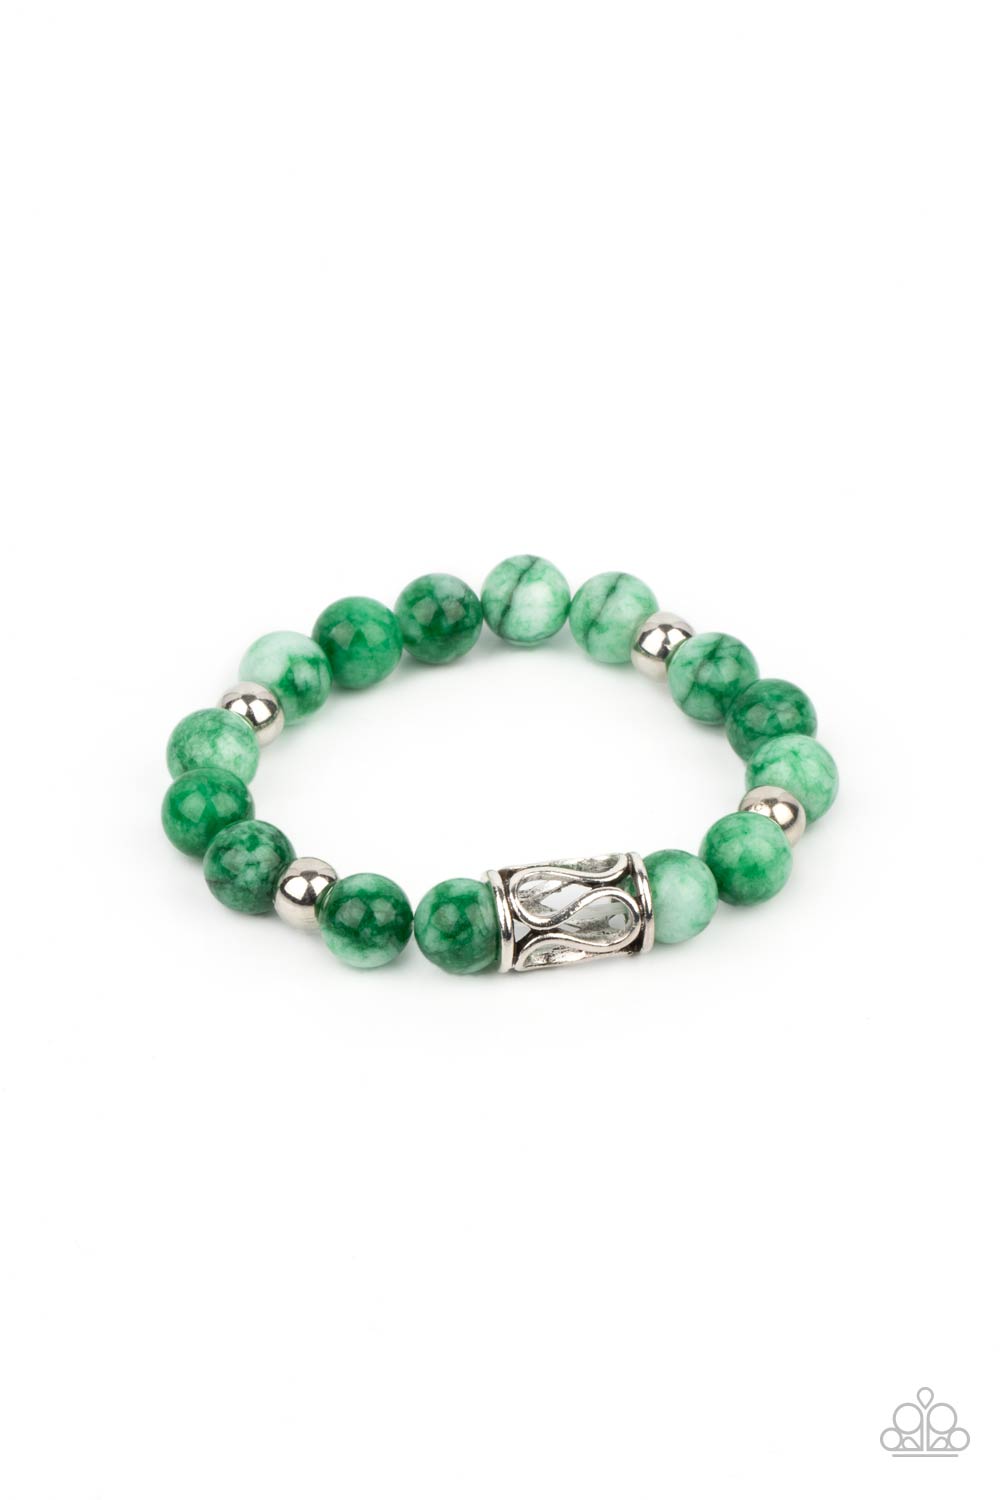 Soothes The Soul - Green Jade and Silver Stretchy Bracelet - Paparazzi Accessories - Infused with an ornate silver centerpiece, an earthy collection of silver and jade beads are threaded along a stretchy band around the wrist for a seasonal flair. Sold as one individual bracelet.